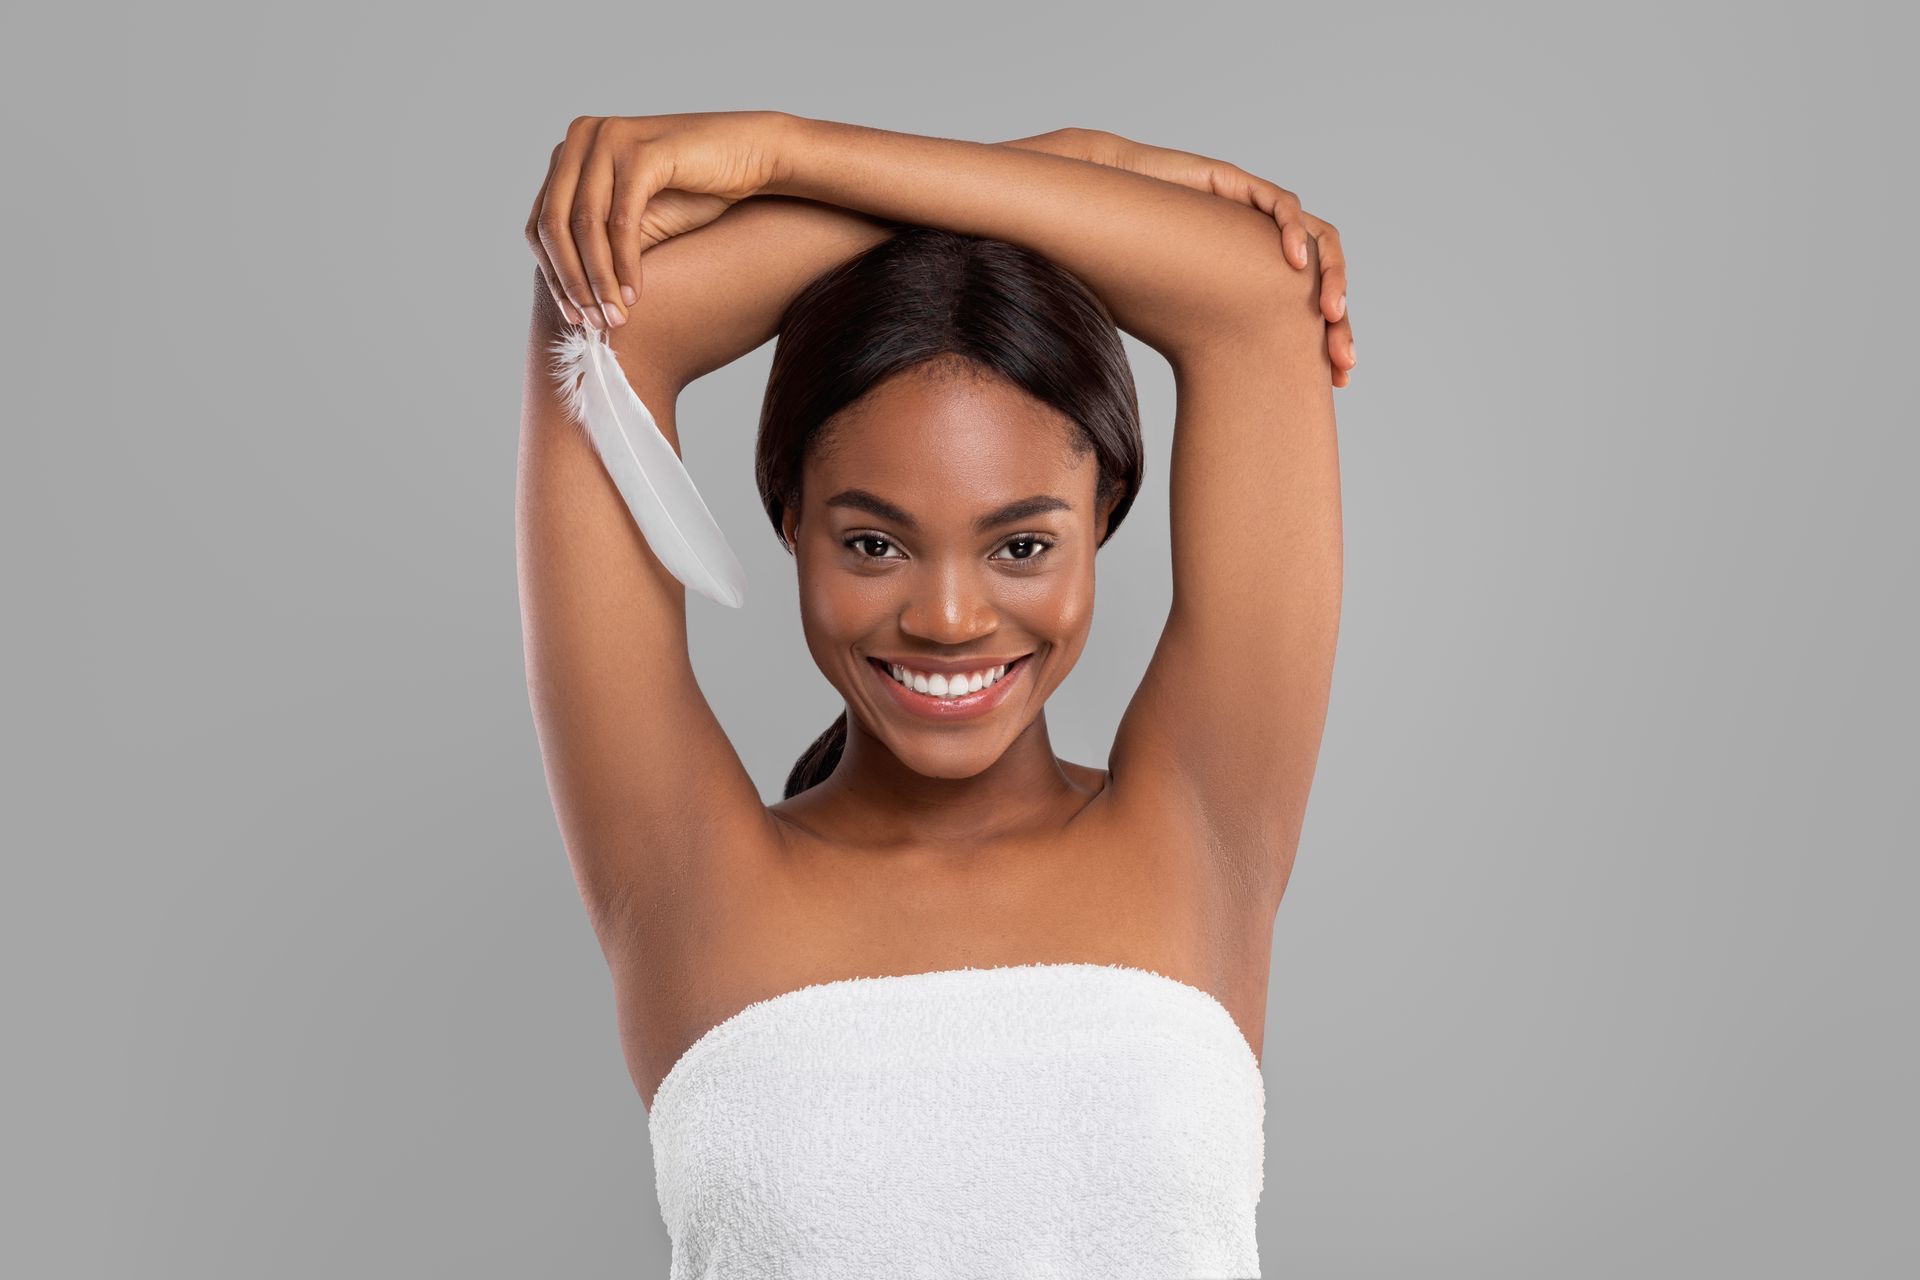 A woman wrapped in a towel is applying lotion to her armpits.